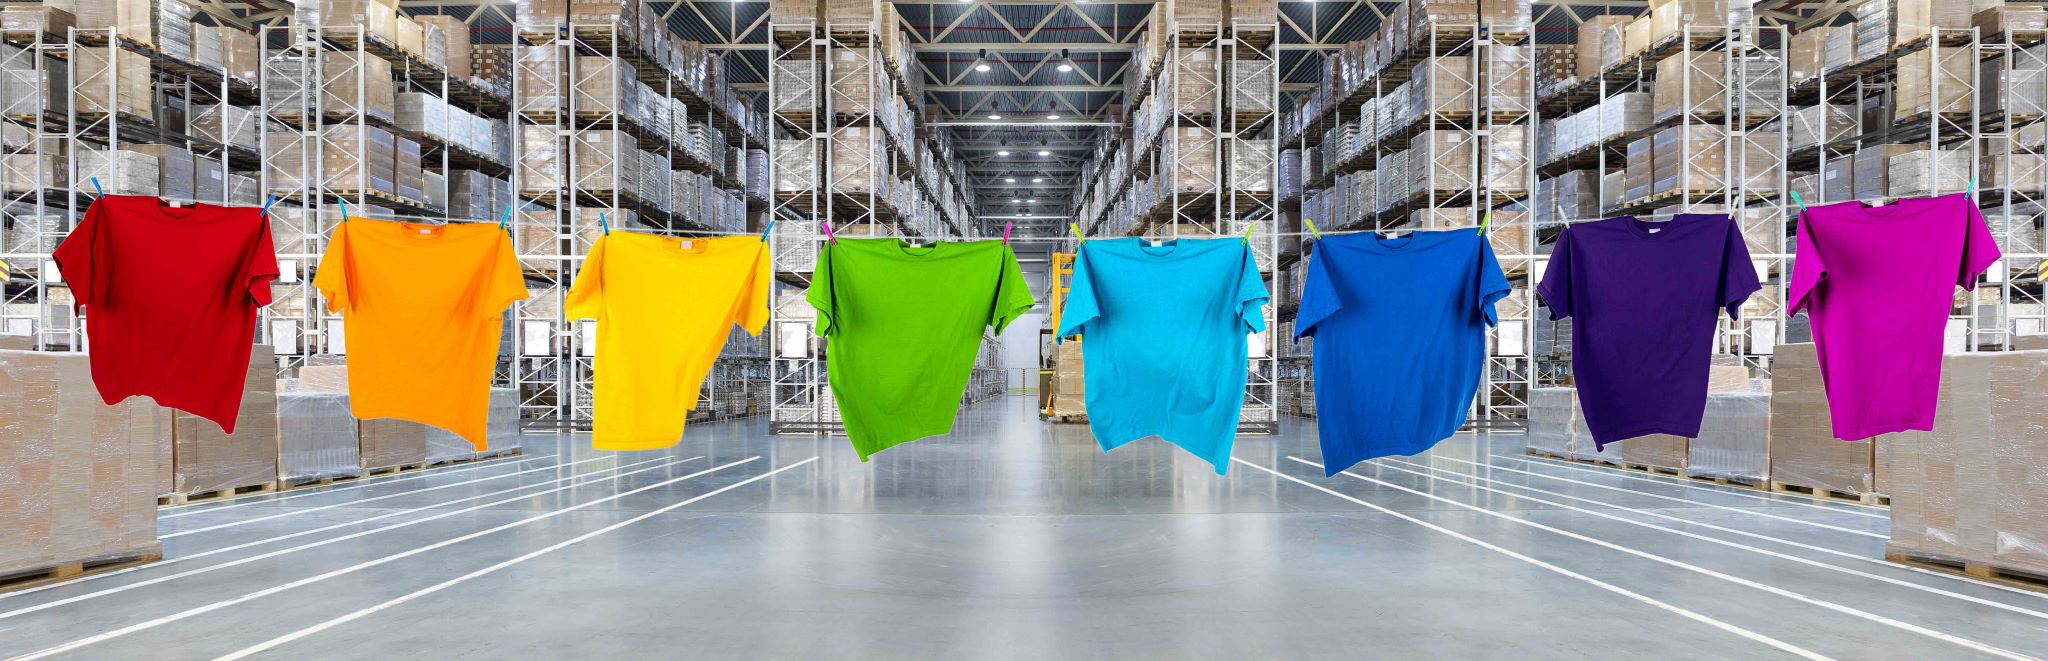 The image symbolises the theme of fashion logistics and shows a line of T-shirts hanging in a warehouse. 